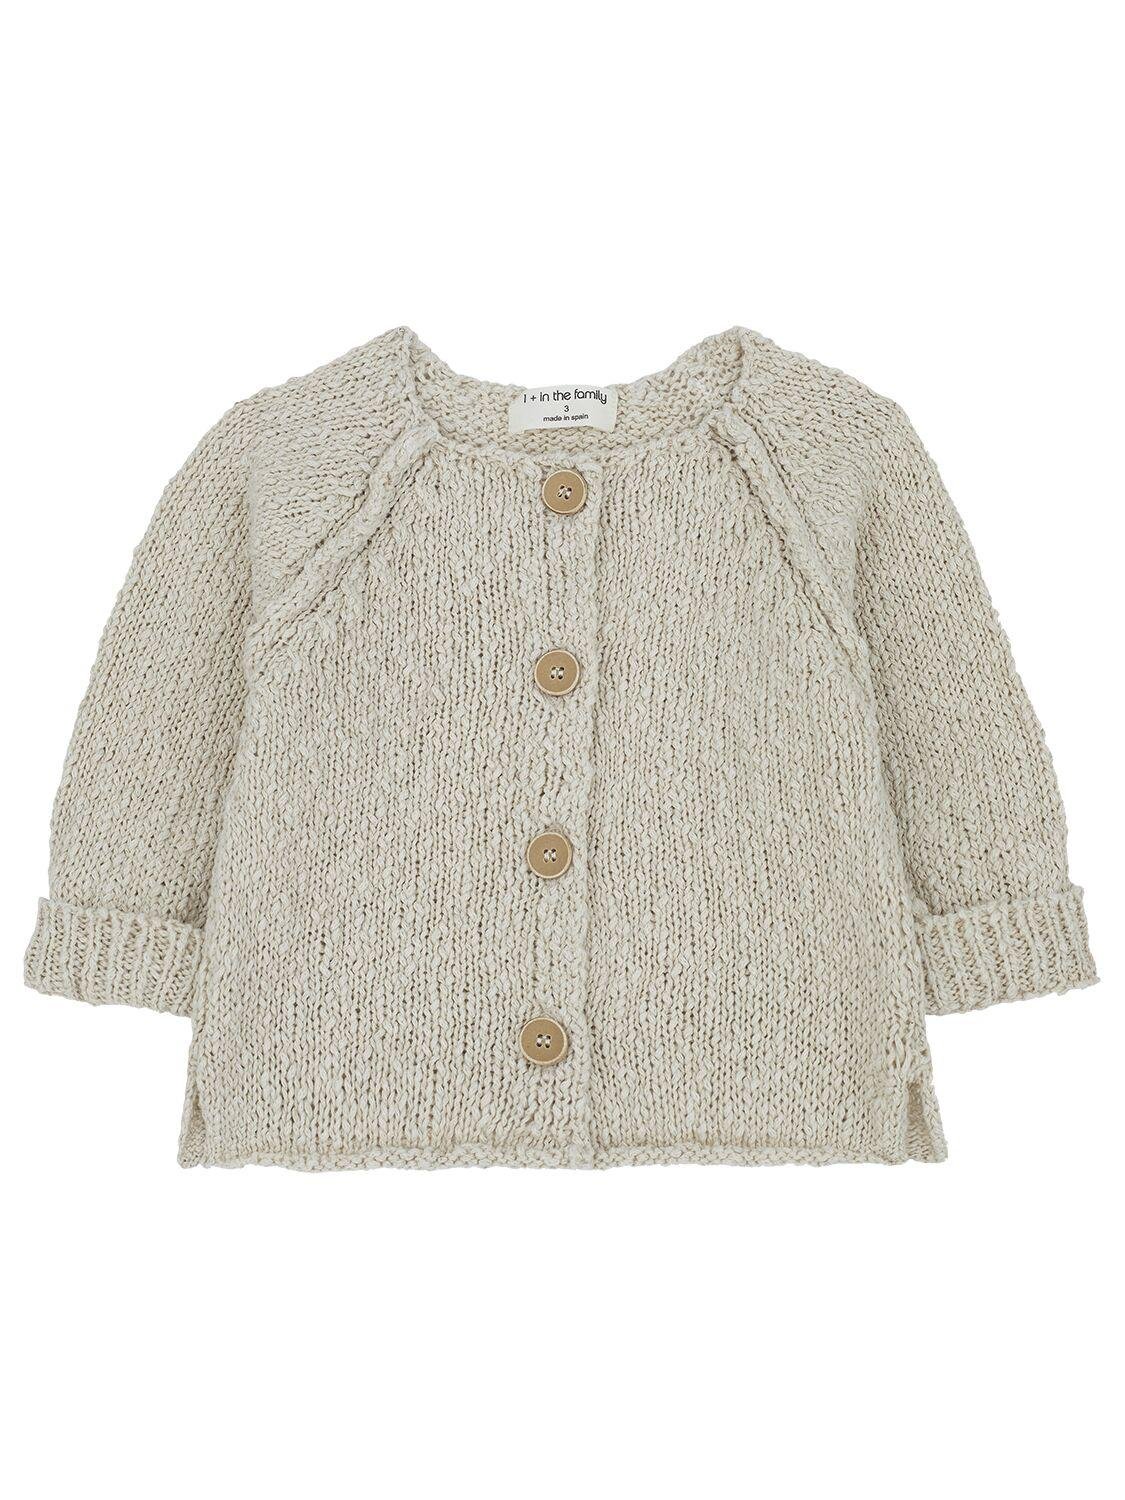 Cotton & Linen Knit Cardigan by 1 + IN THE FAMILY